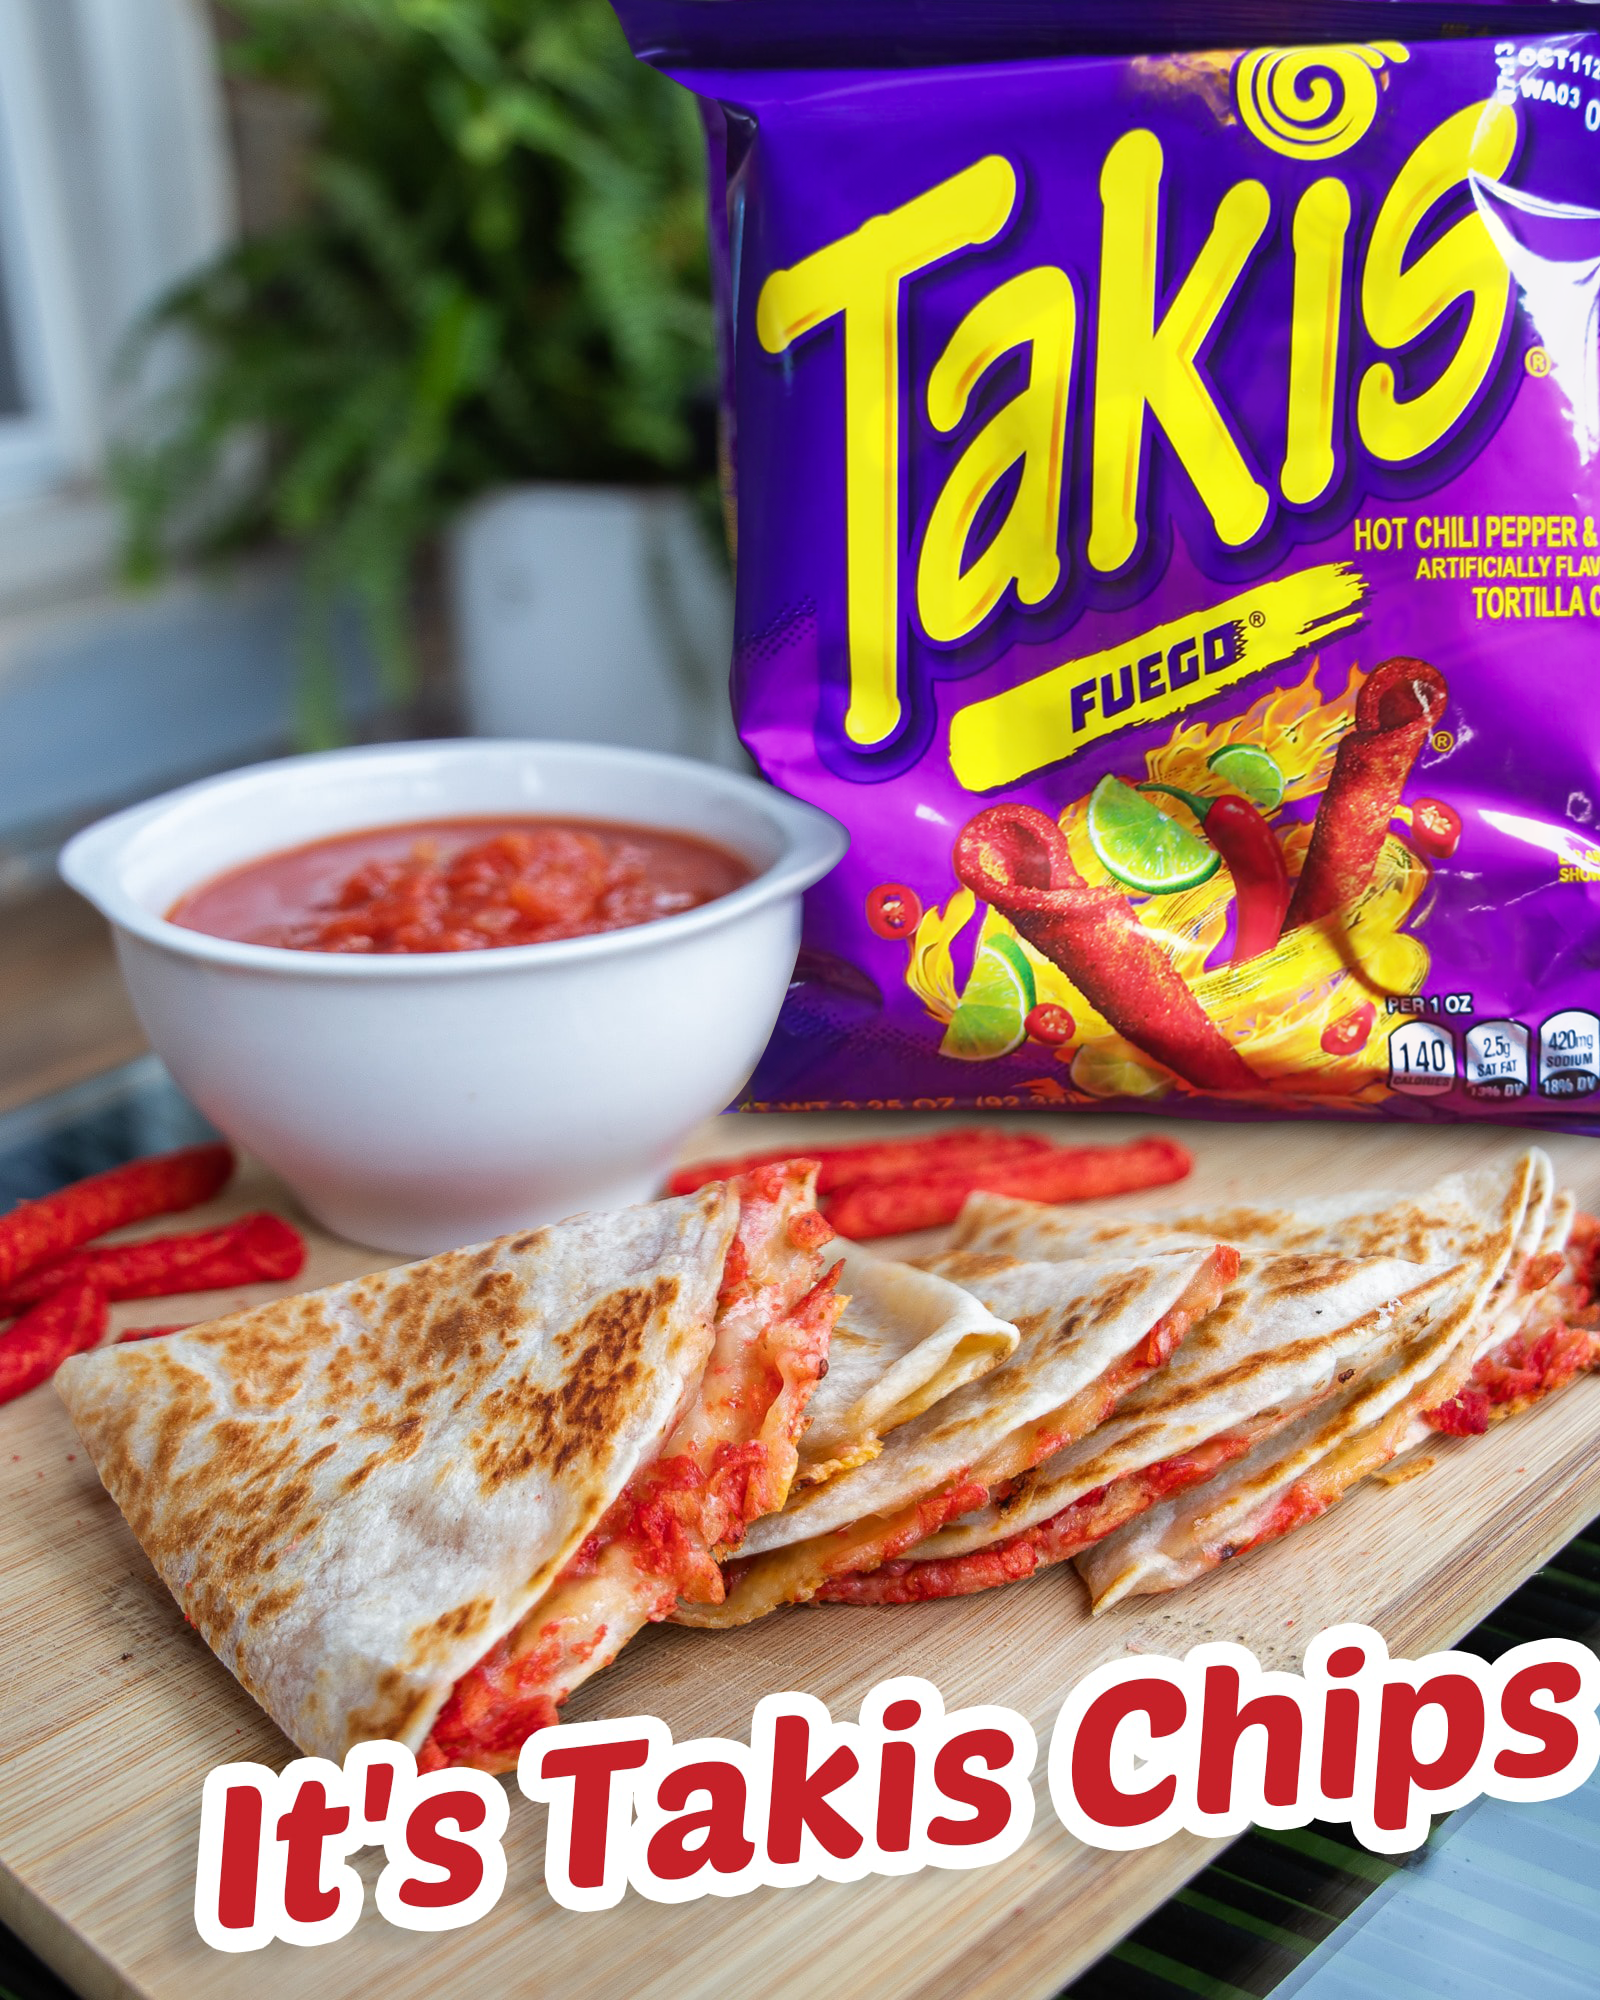 Barcel Takis Fuego 3.25 oz Hot Chili Pepper & Lime Flavored Rolled Tortilla Chips